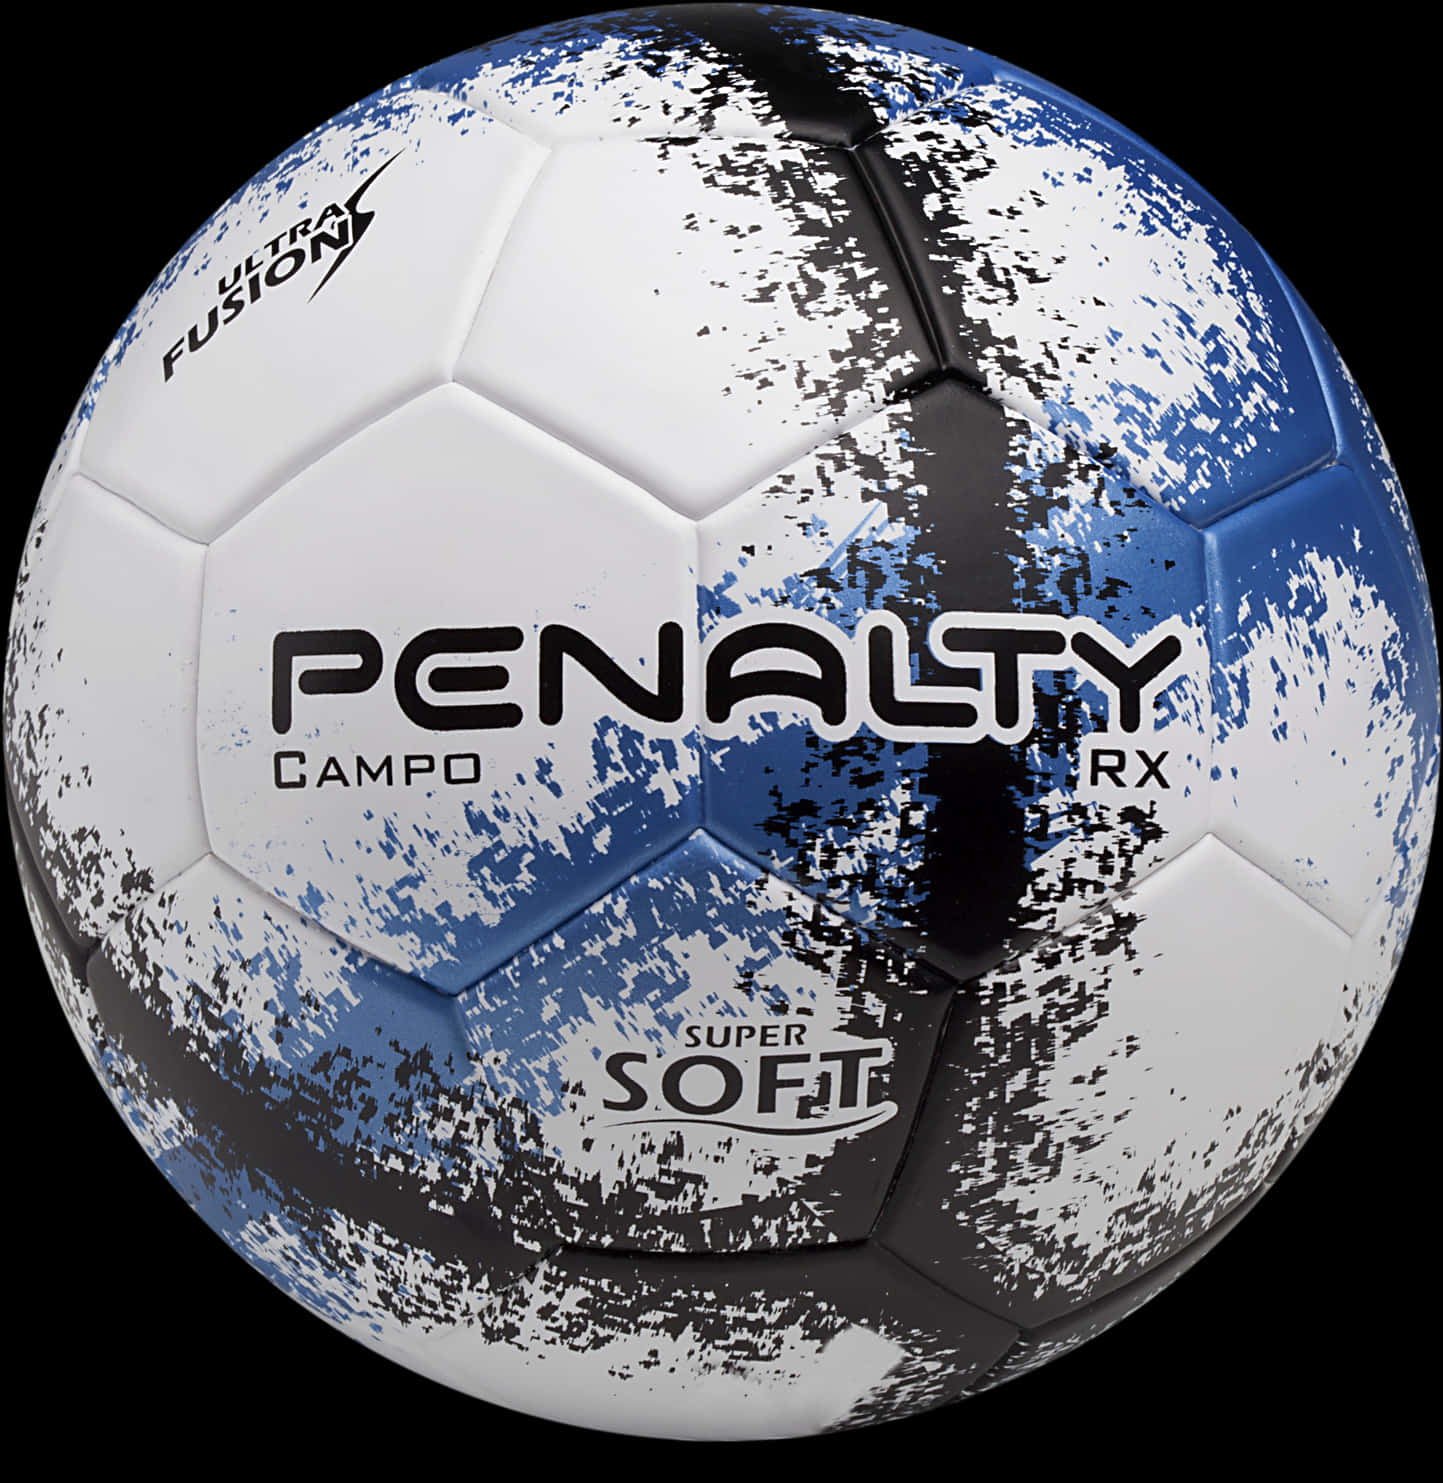 A Football Ball With Black And Blue Paint Splatters